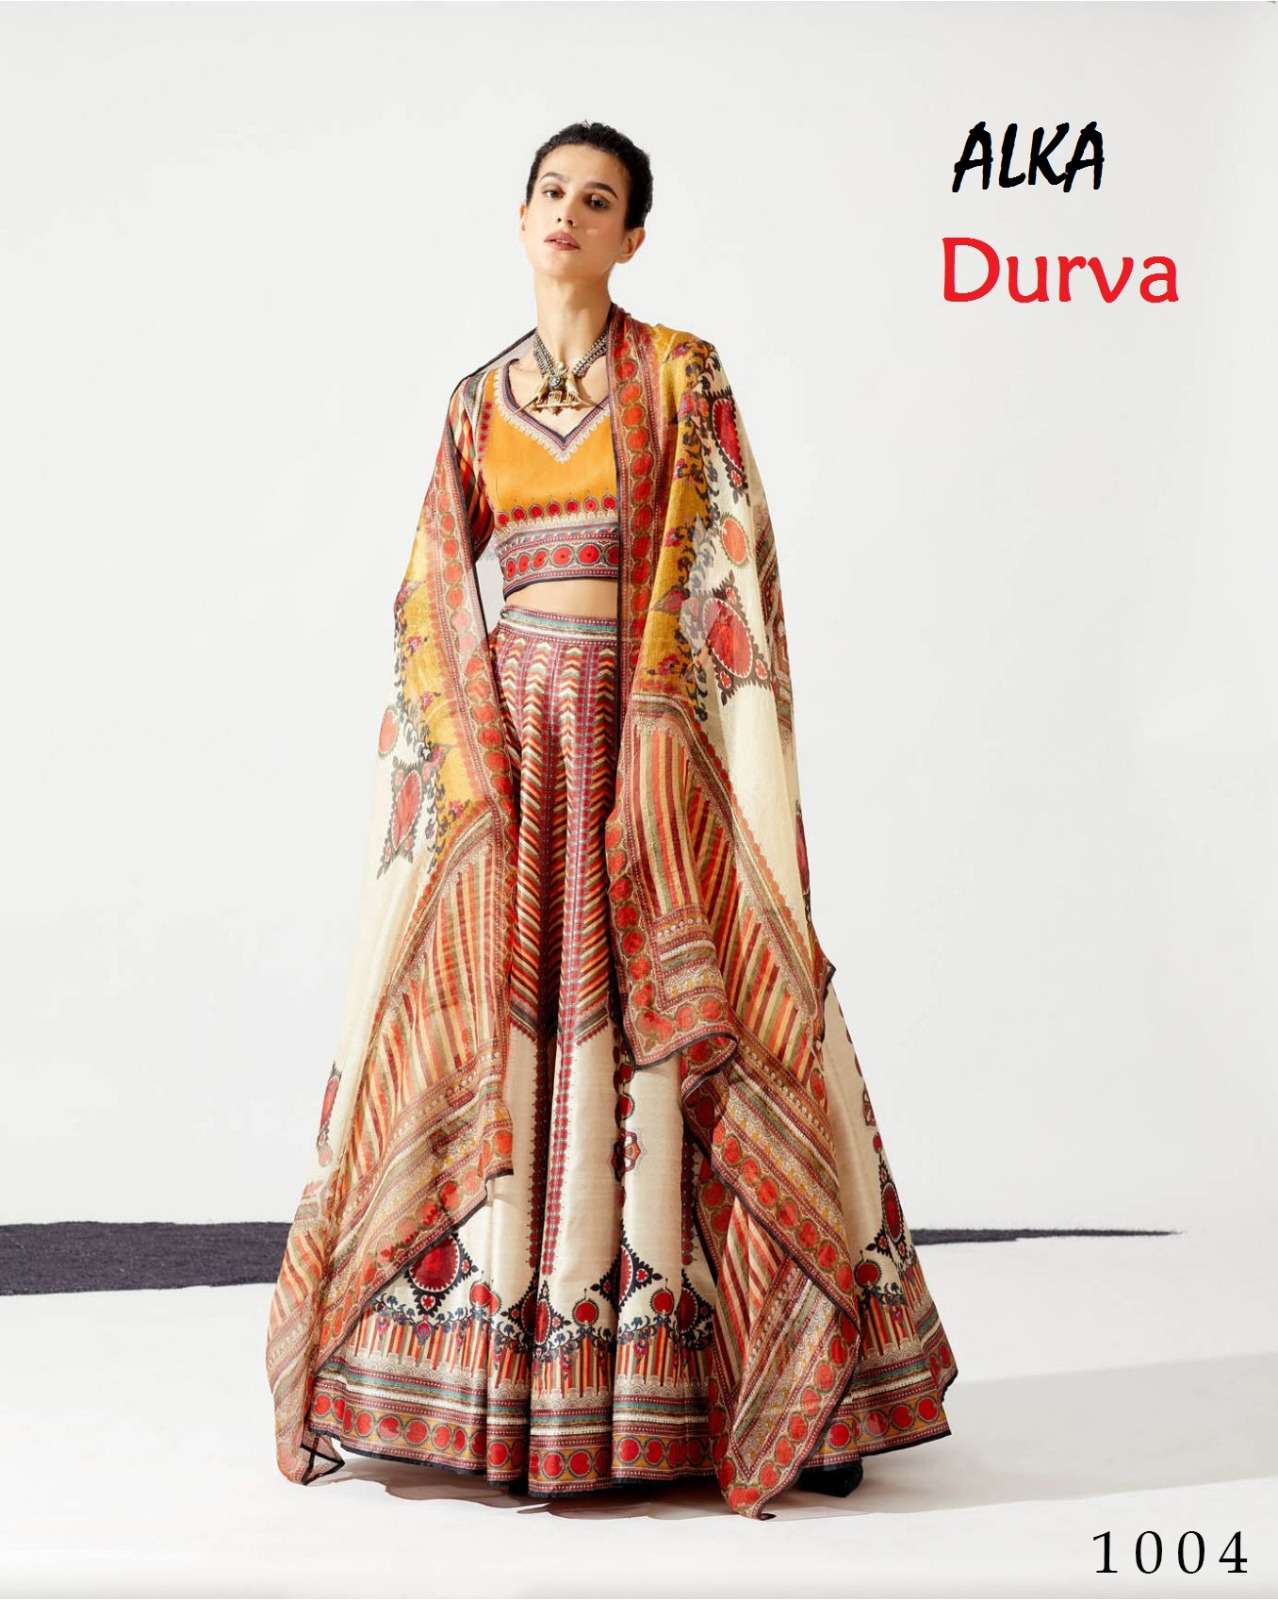 Durva By Alka 1001 To 1006 Series Festive Wear Collection Beautiful Stylish Colorful Fancy Party Wear & Occasional Wear Chinnon Lehengas At Wholesale Price